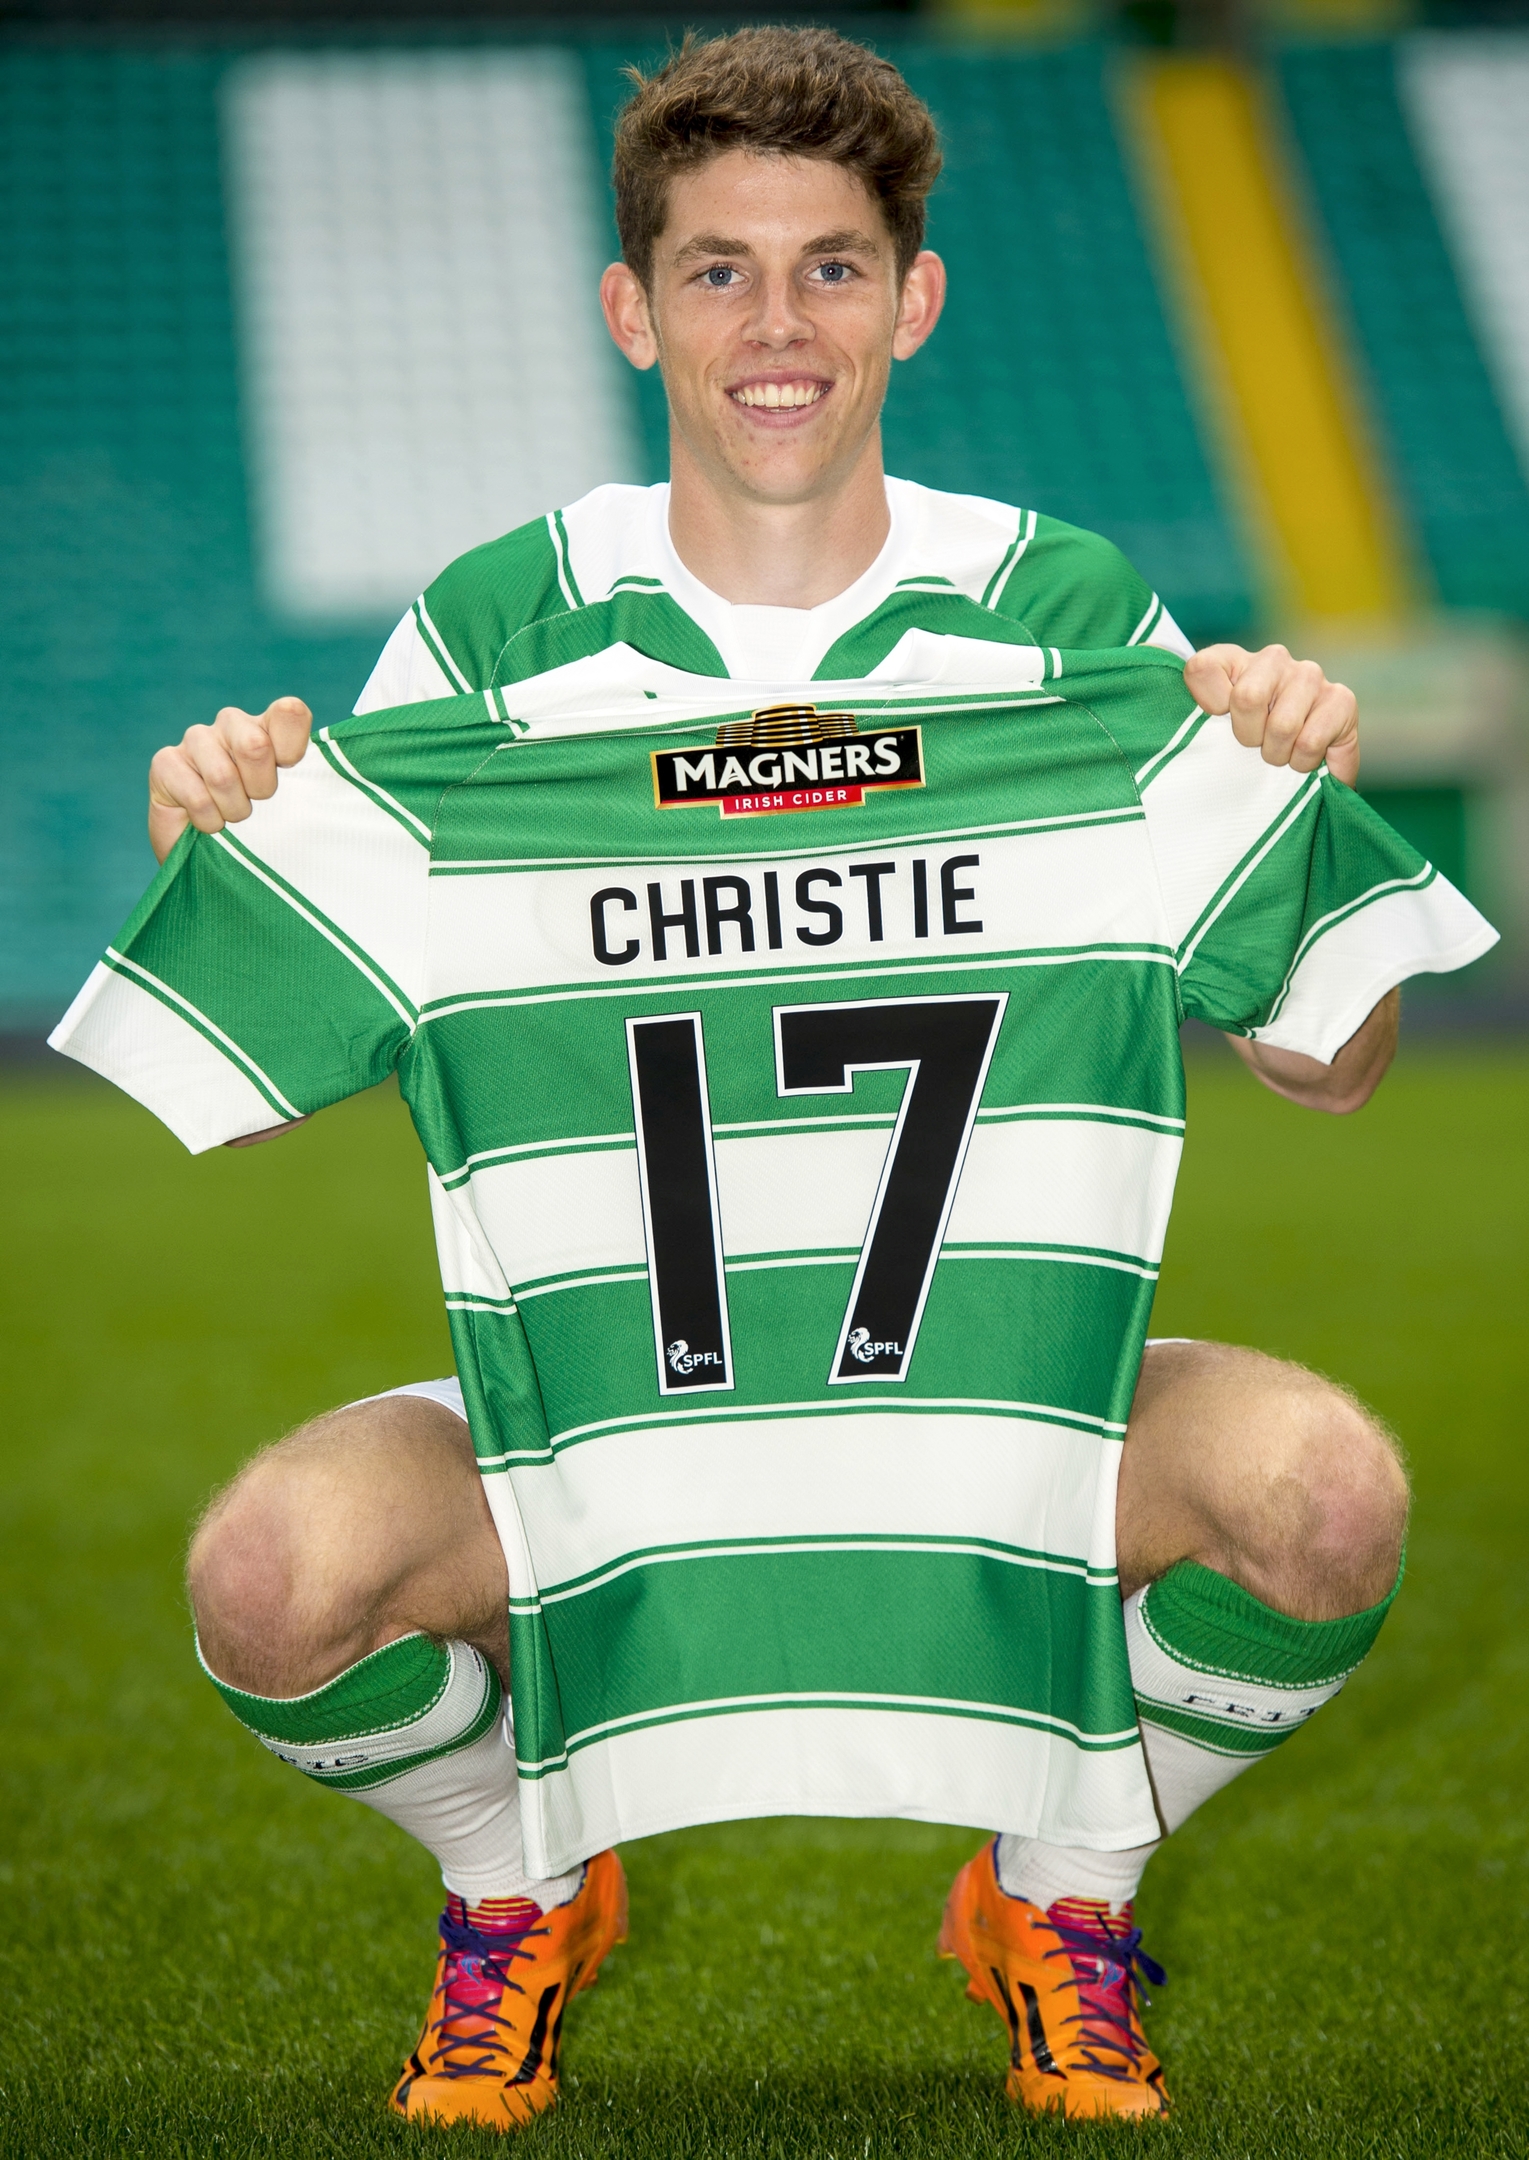 01/09/15        CELTIC PARK - GLASGOW     Delight for Ryan Christie as he is unveiled as Celtic's newest signing.